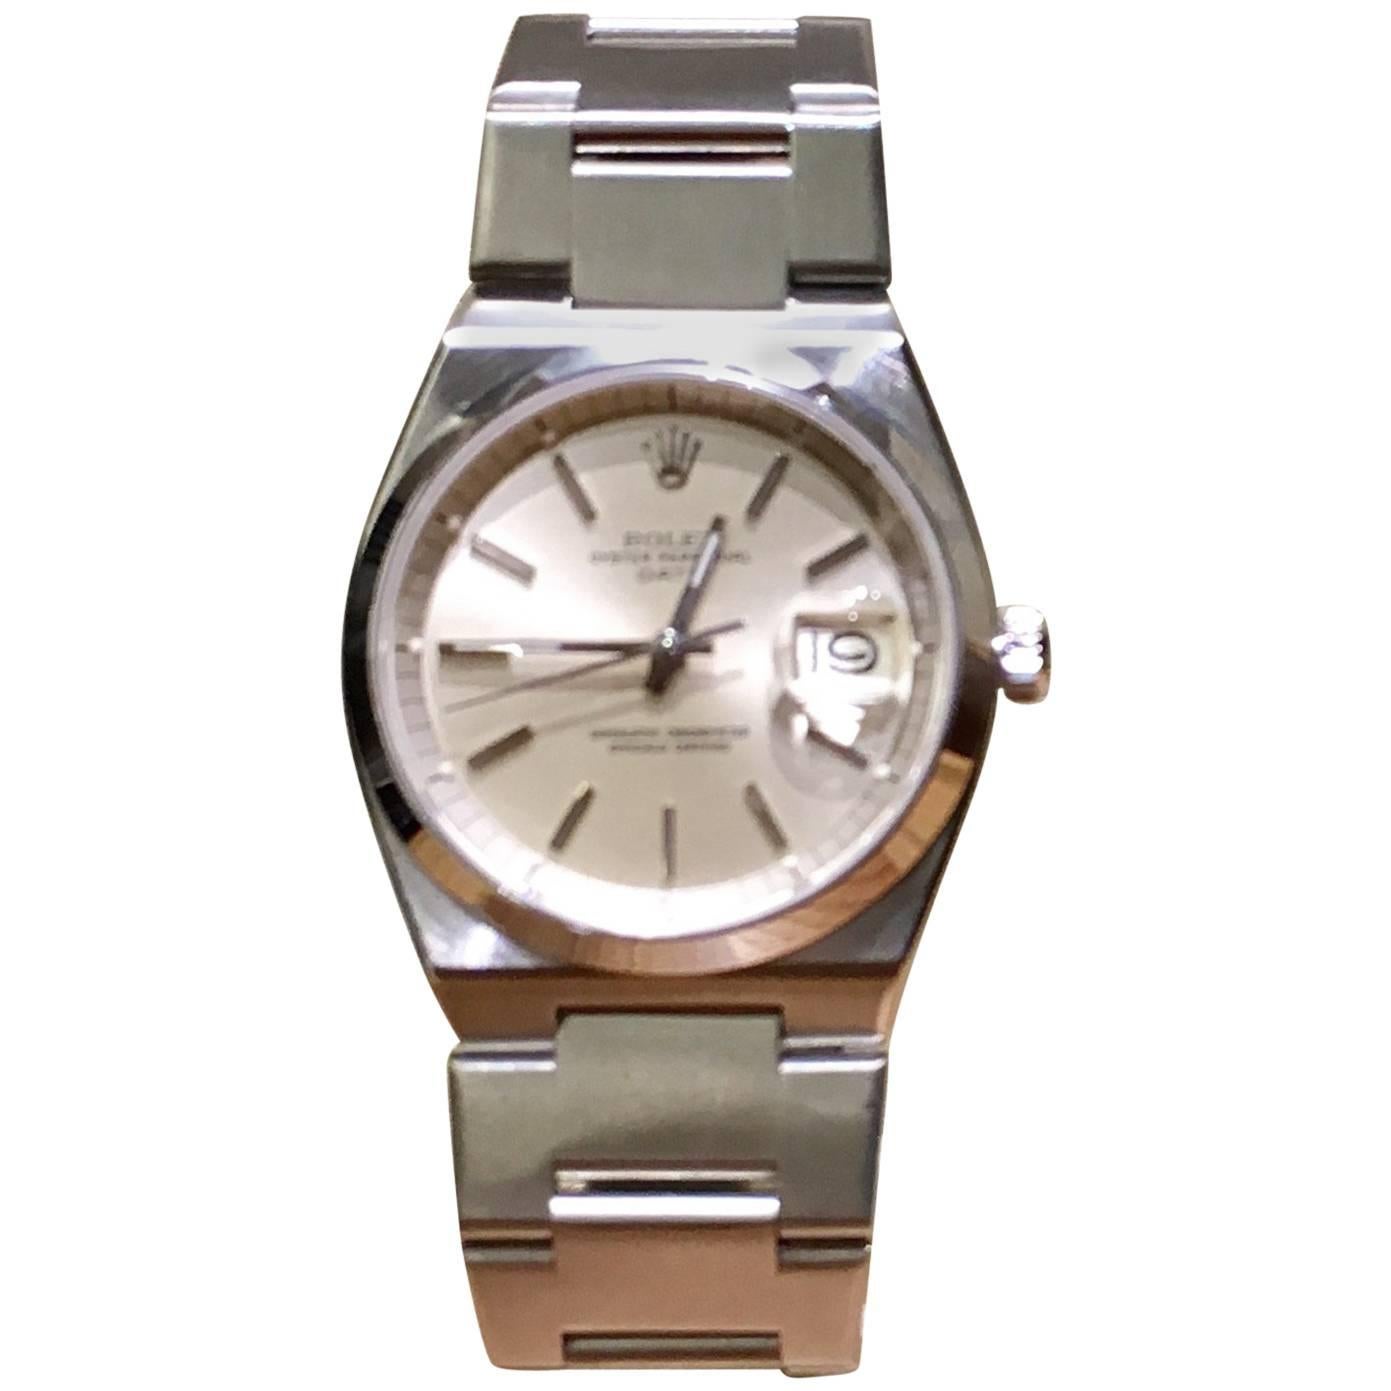 Rolex Stainless Steel Datejust Oyster Perpetual wristwatch Ref 1530, circa 1976 For Sale